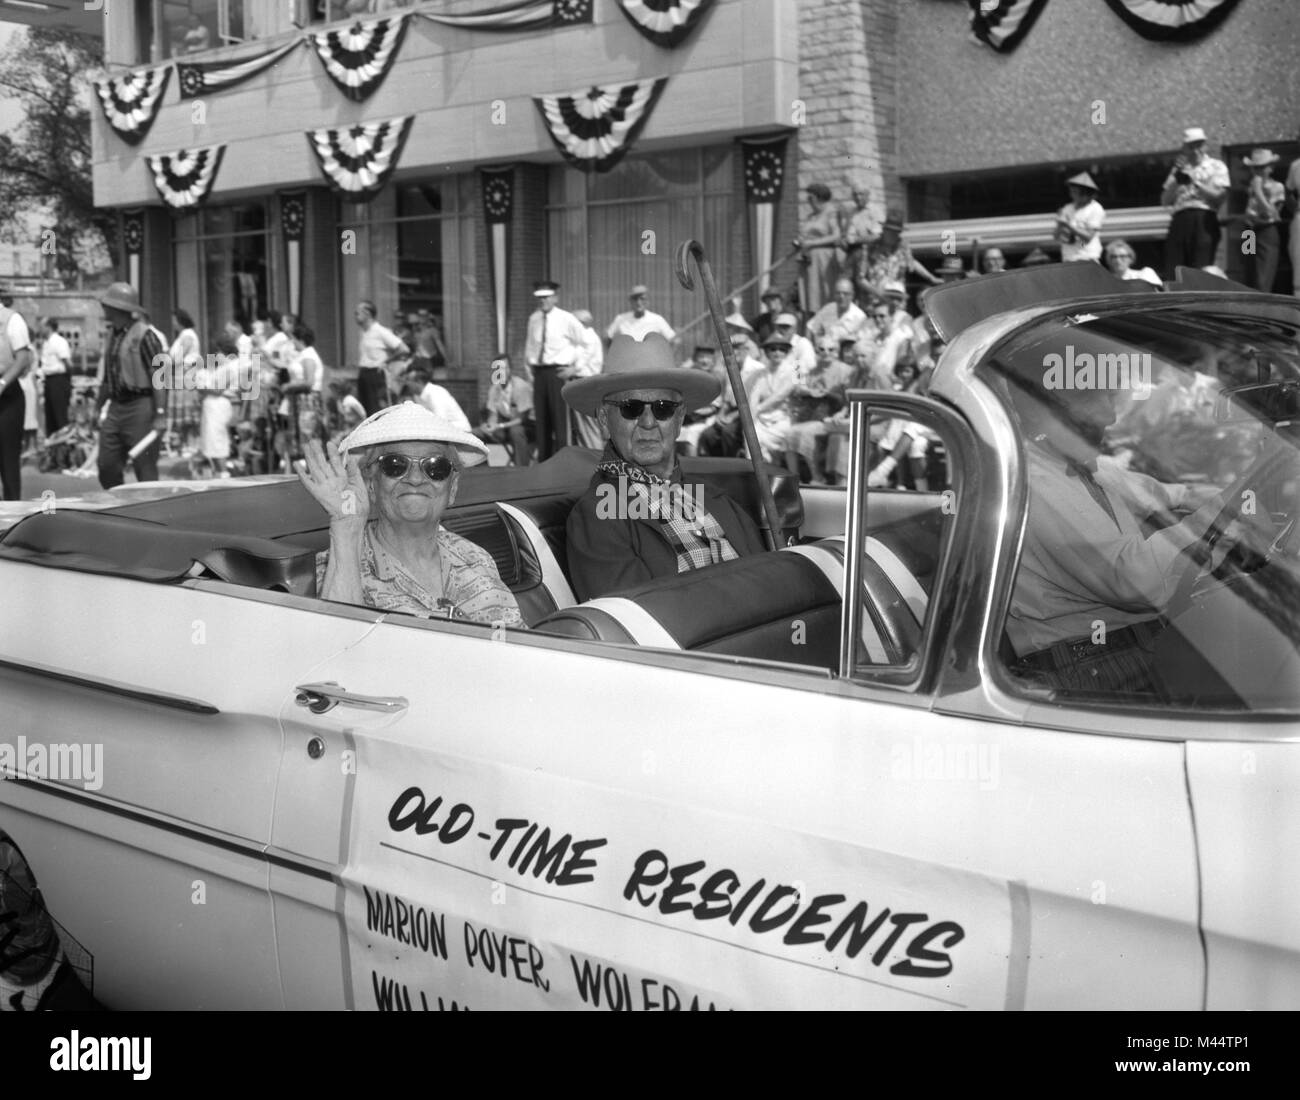 Senior citizens have a place of honor in a community parade by virtue of their age, ca. 1959. Stock Photo